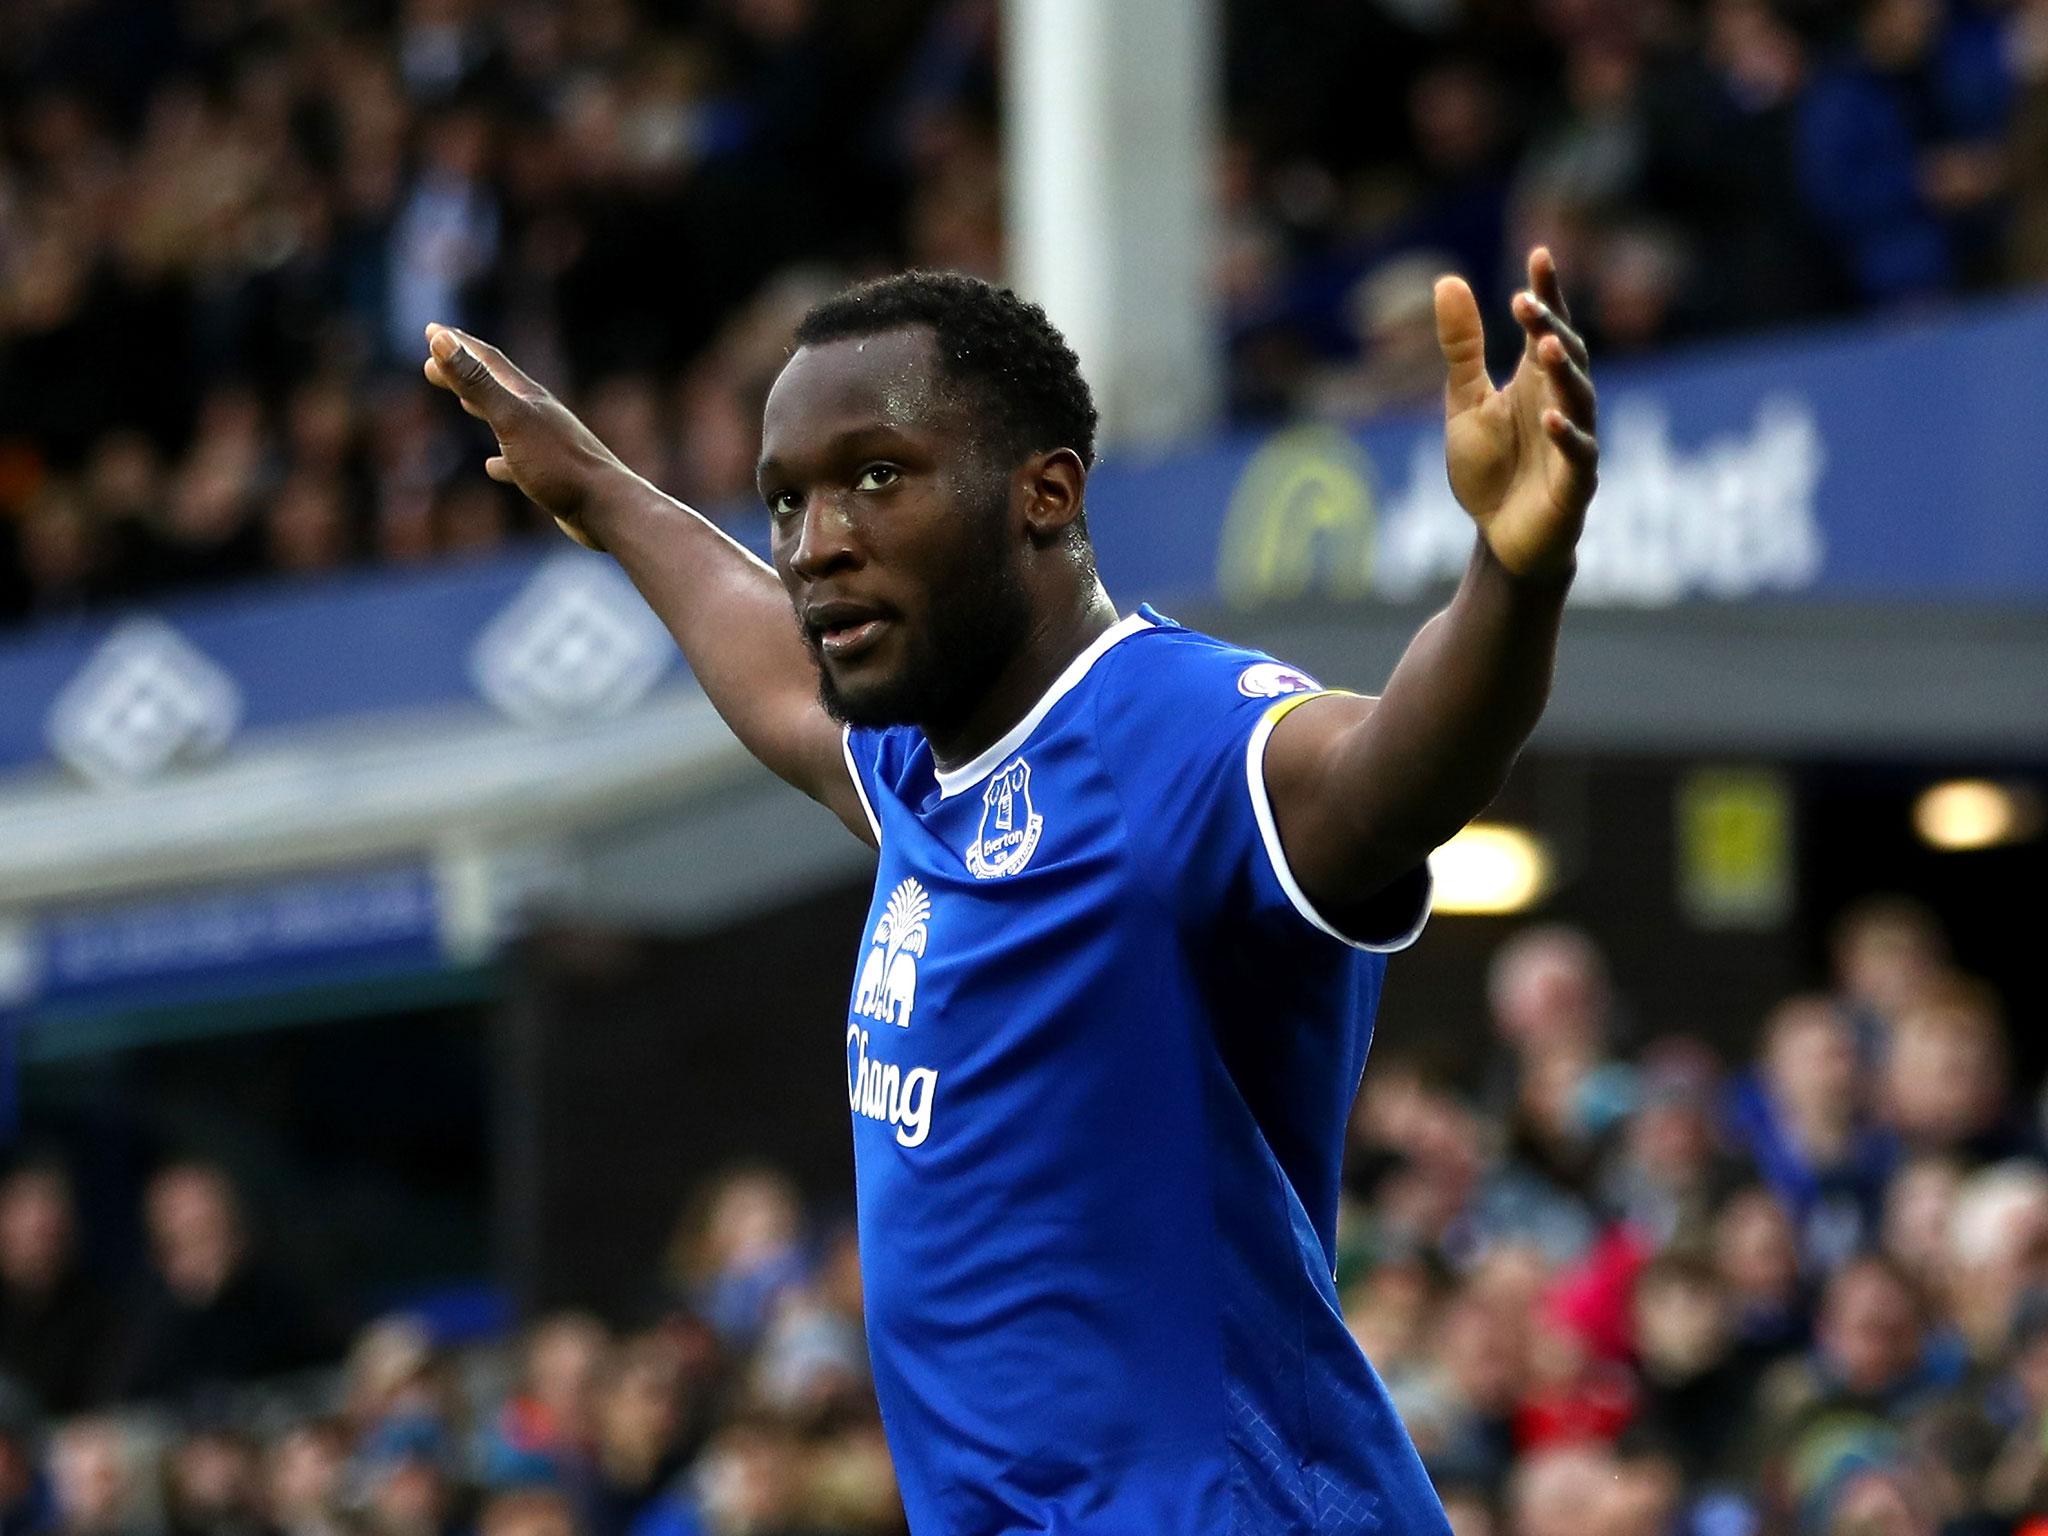 Lukaku has been repeatedly linked with a move away from Goodison Park